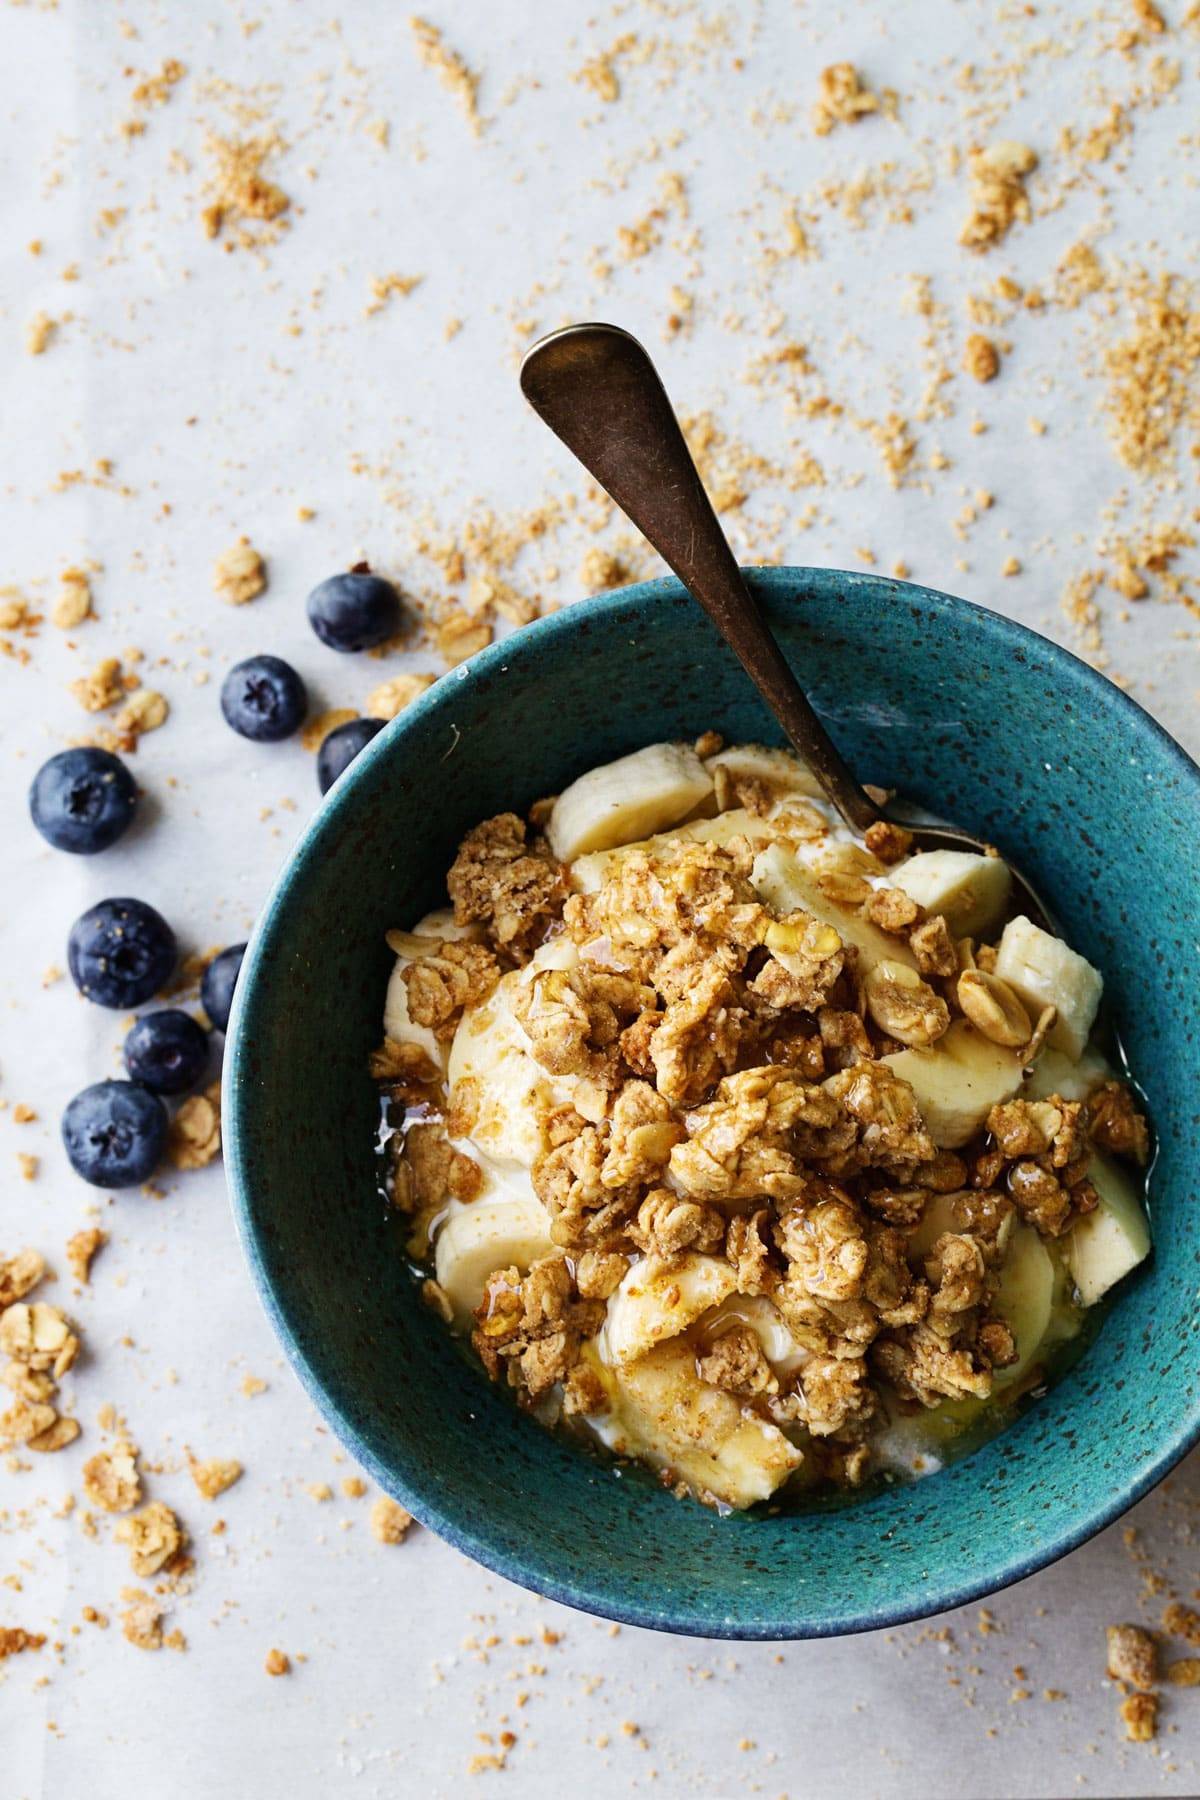 Big Cluster Peanut Butter Granola with bananas and blueberries in a blue bowl.